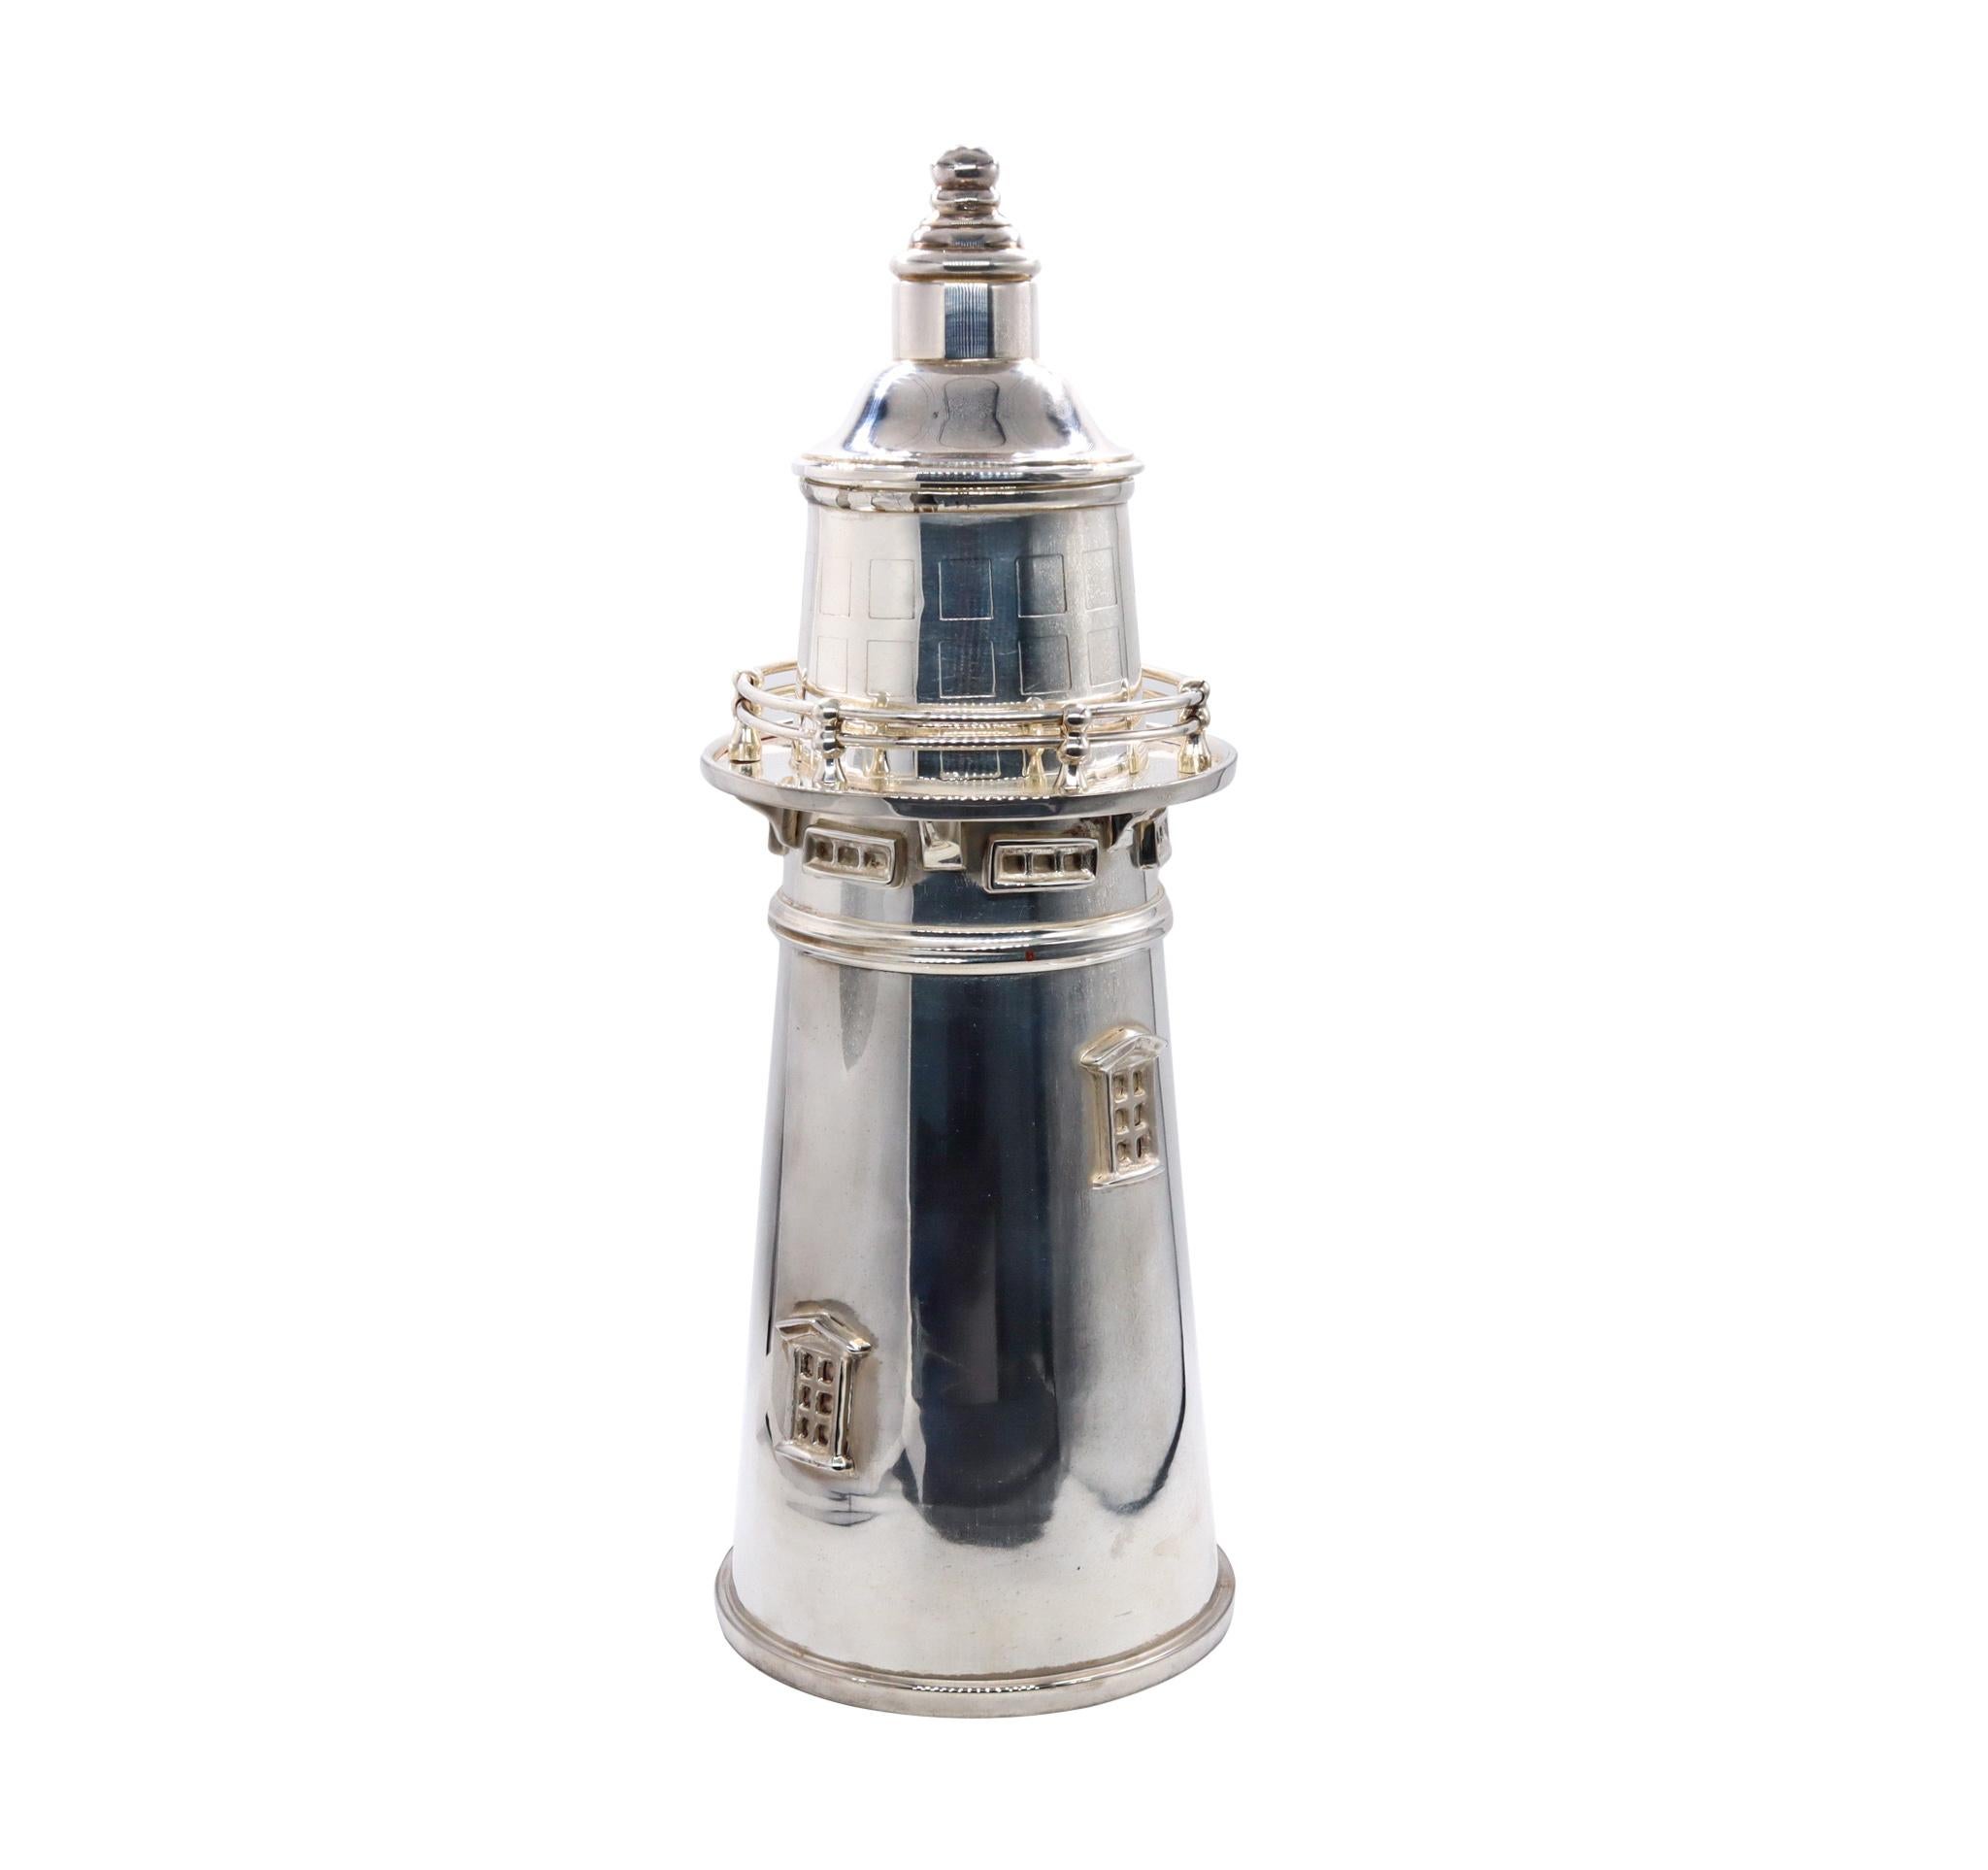 Art-Deco Cocktail Shaker in the shape of a lighthouse.

Very decorative and unusual piece made in Sheffield, United Kingdom, during the late deco period, circa 1930. This cocktail drinks shaker was crafted in the shape of a lighthouse and all the